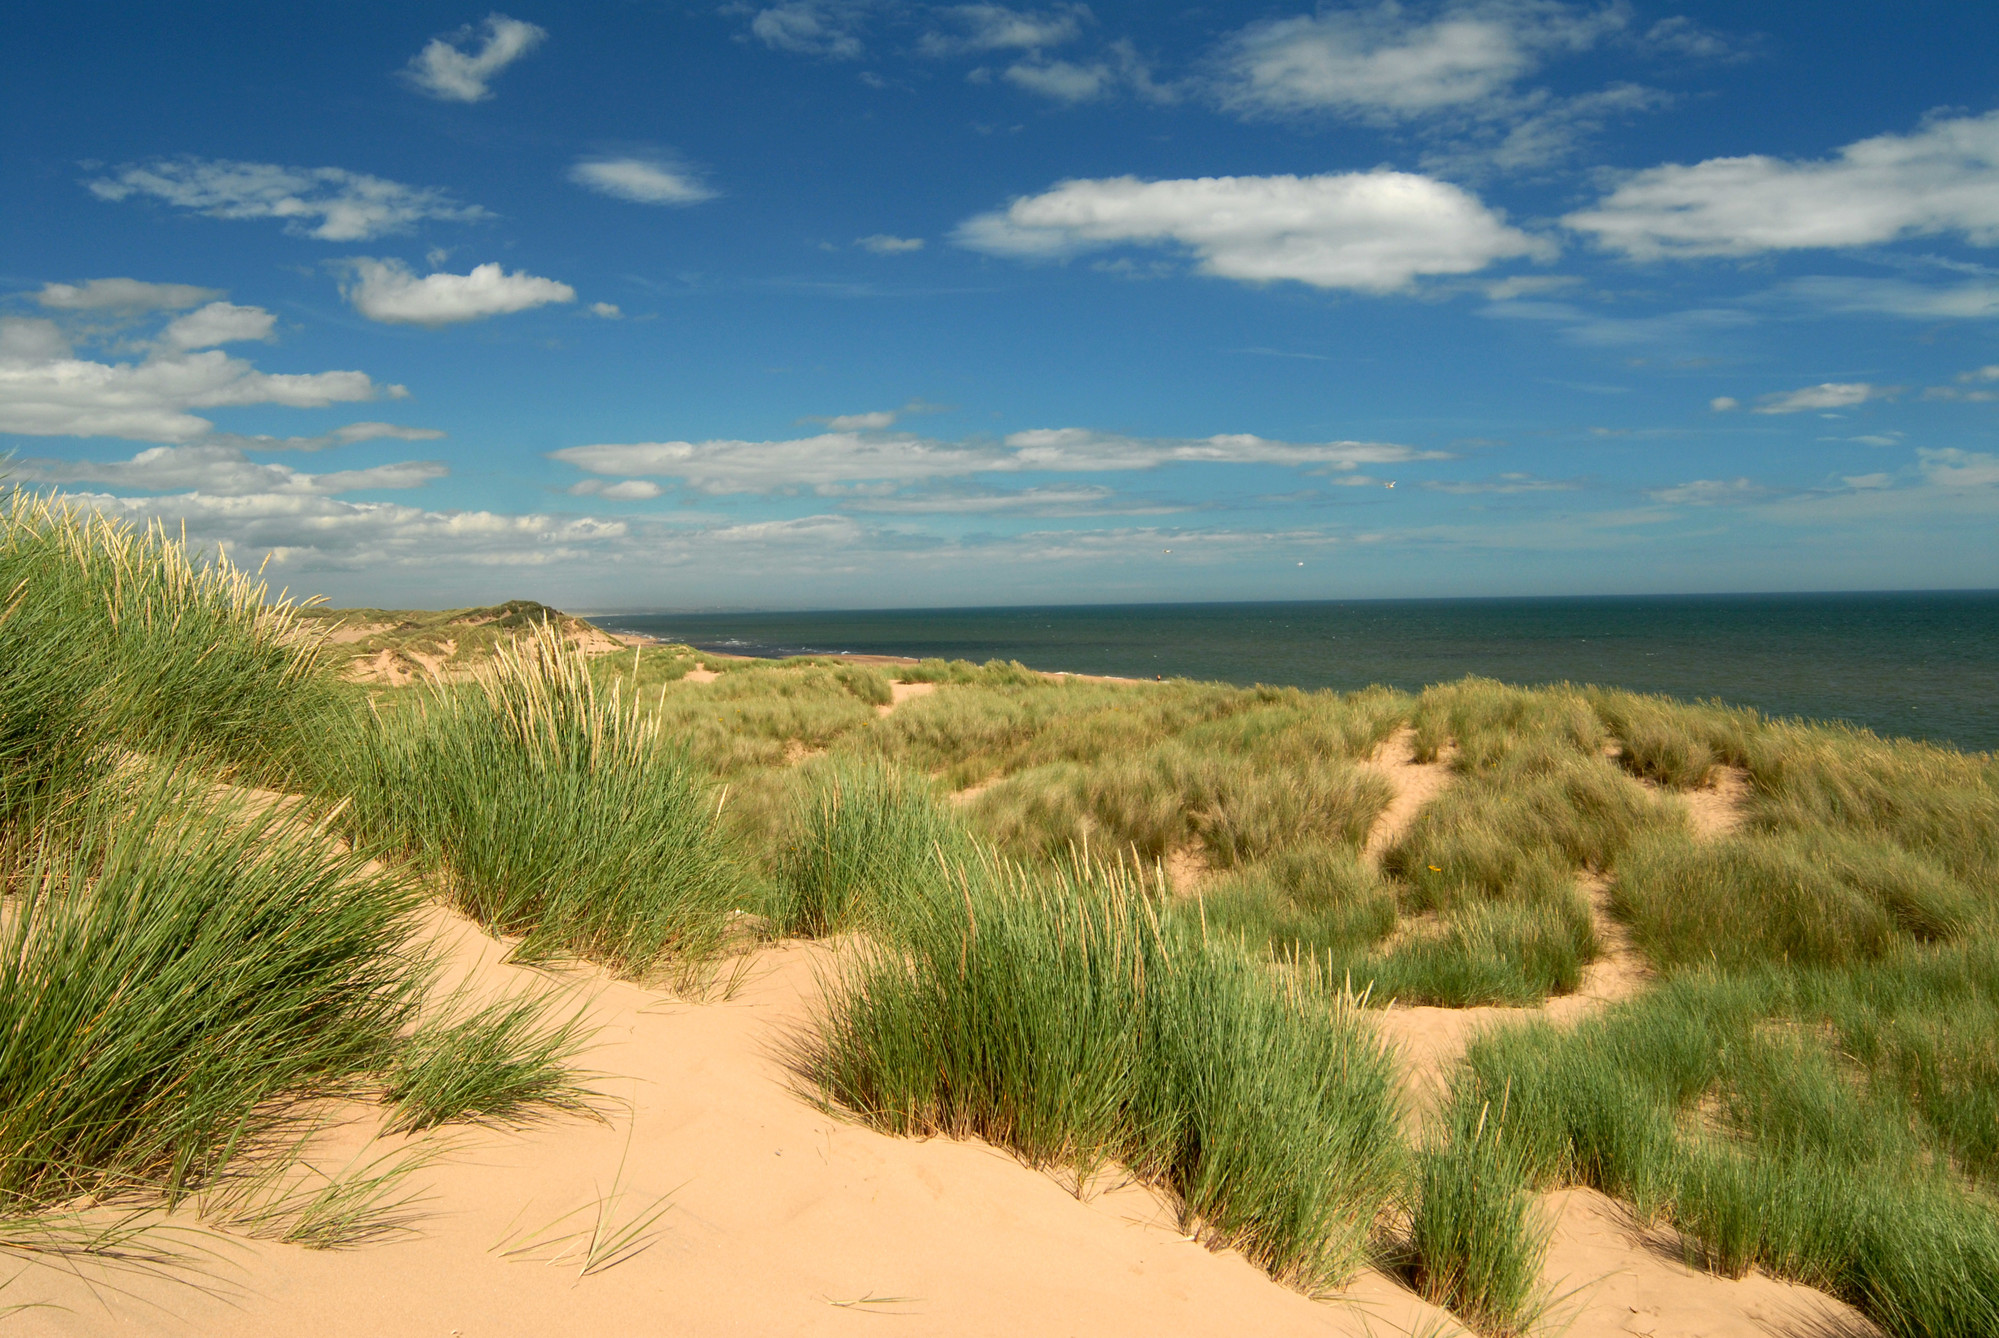 A picture of Balmedie beach and dunes on a sunny day looking out over the North Sea